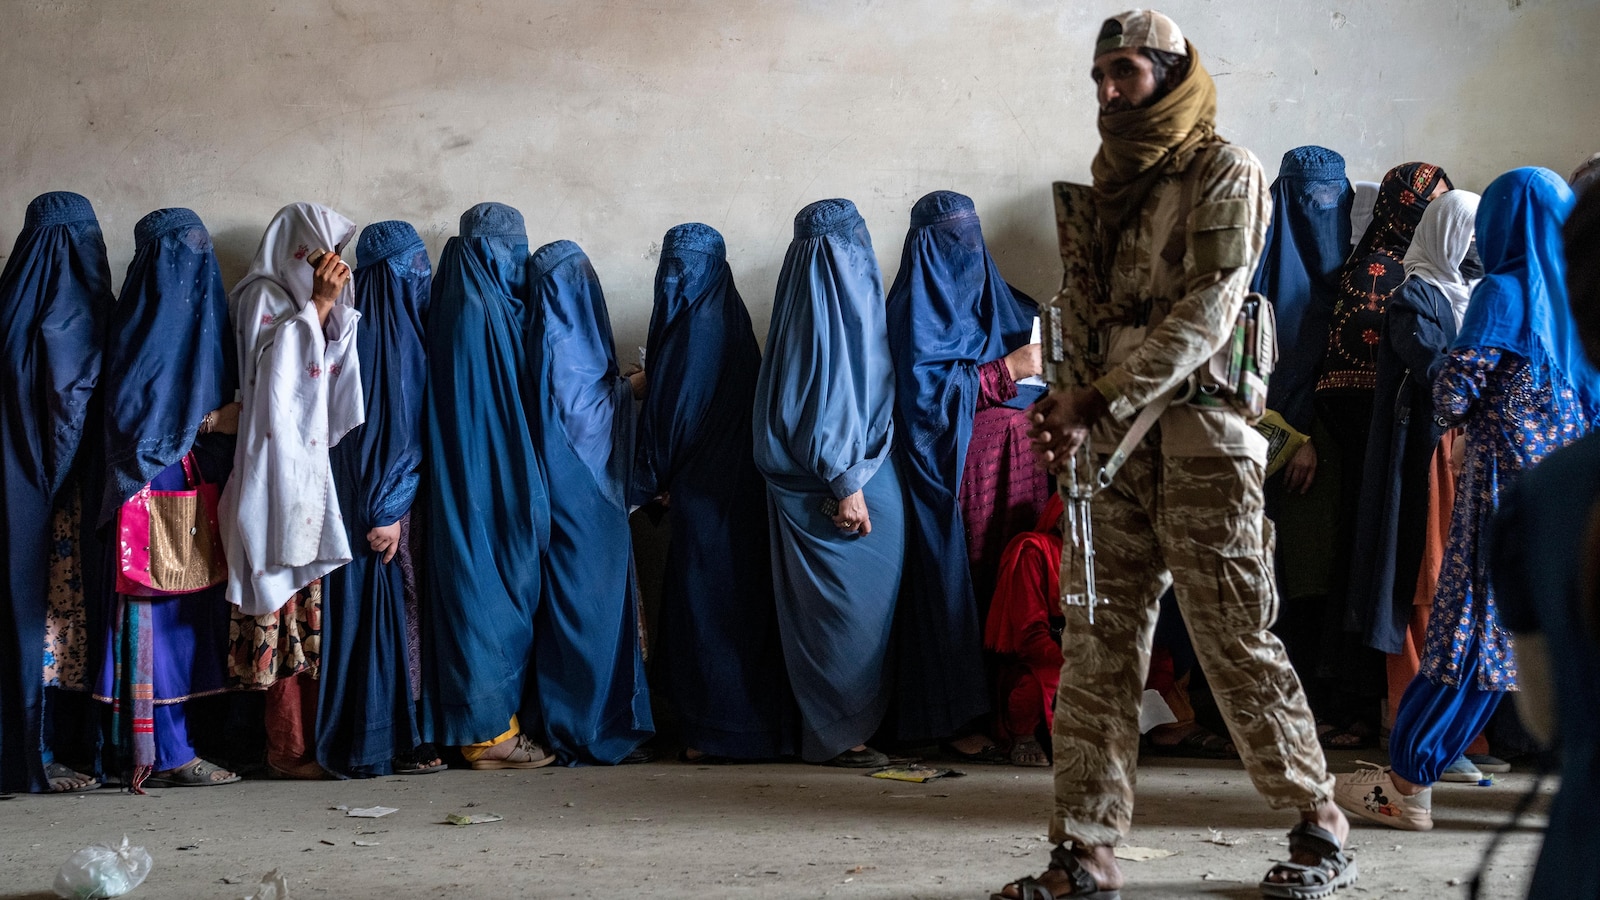 UN reports Taliban imposing restrictions on single and unaccompanied Afghan women